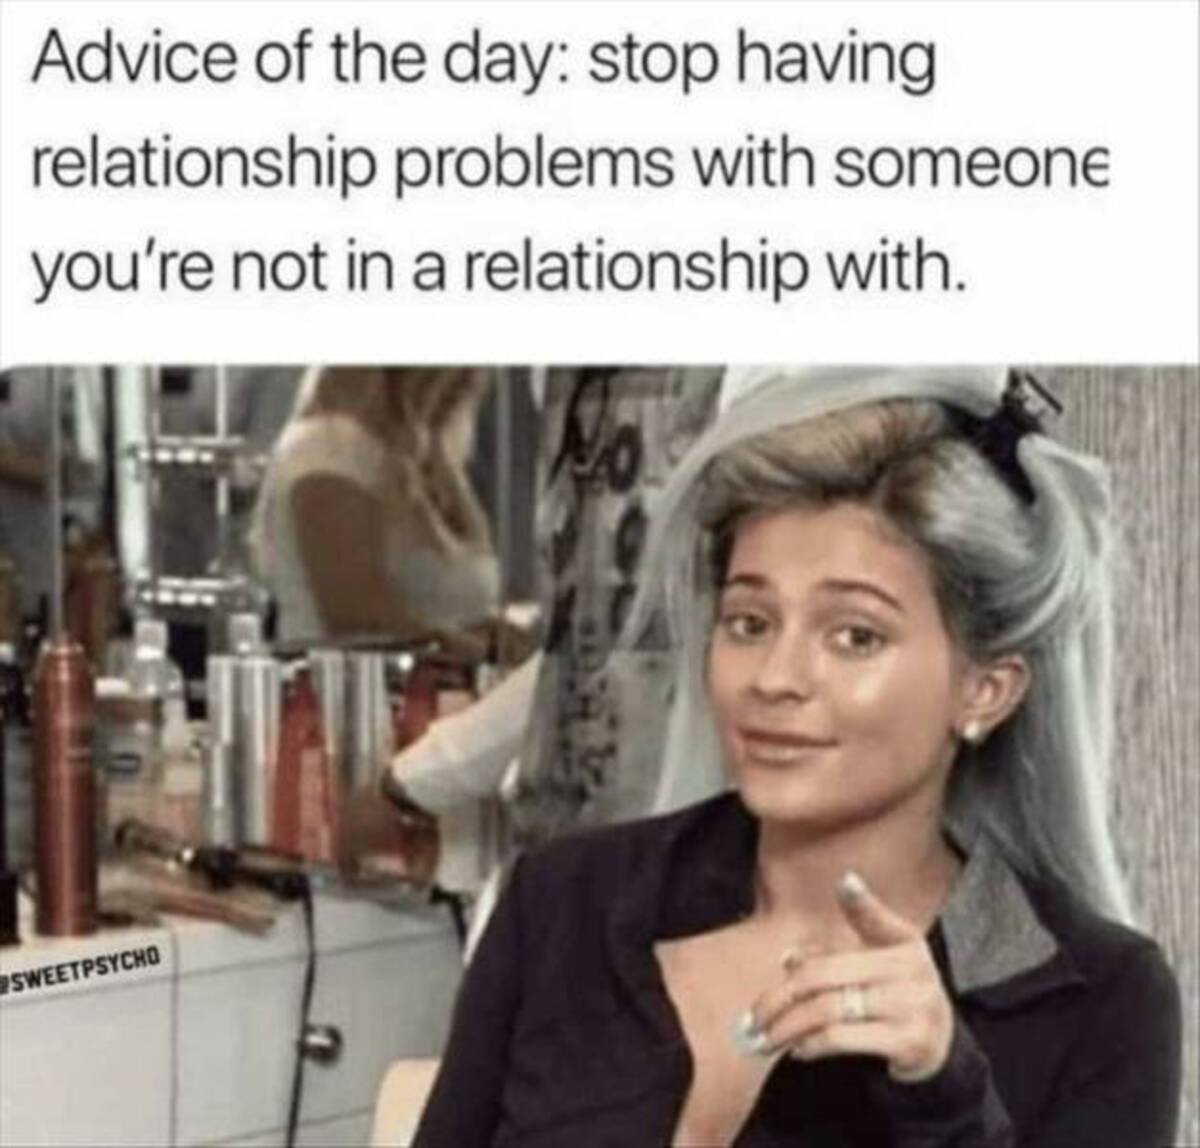 i m joking unless you re down meme - Advice of the day stop having relationship problems with someone you're not in a relationship with. Sweetpsycho